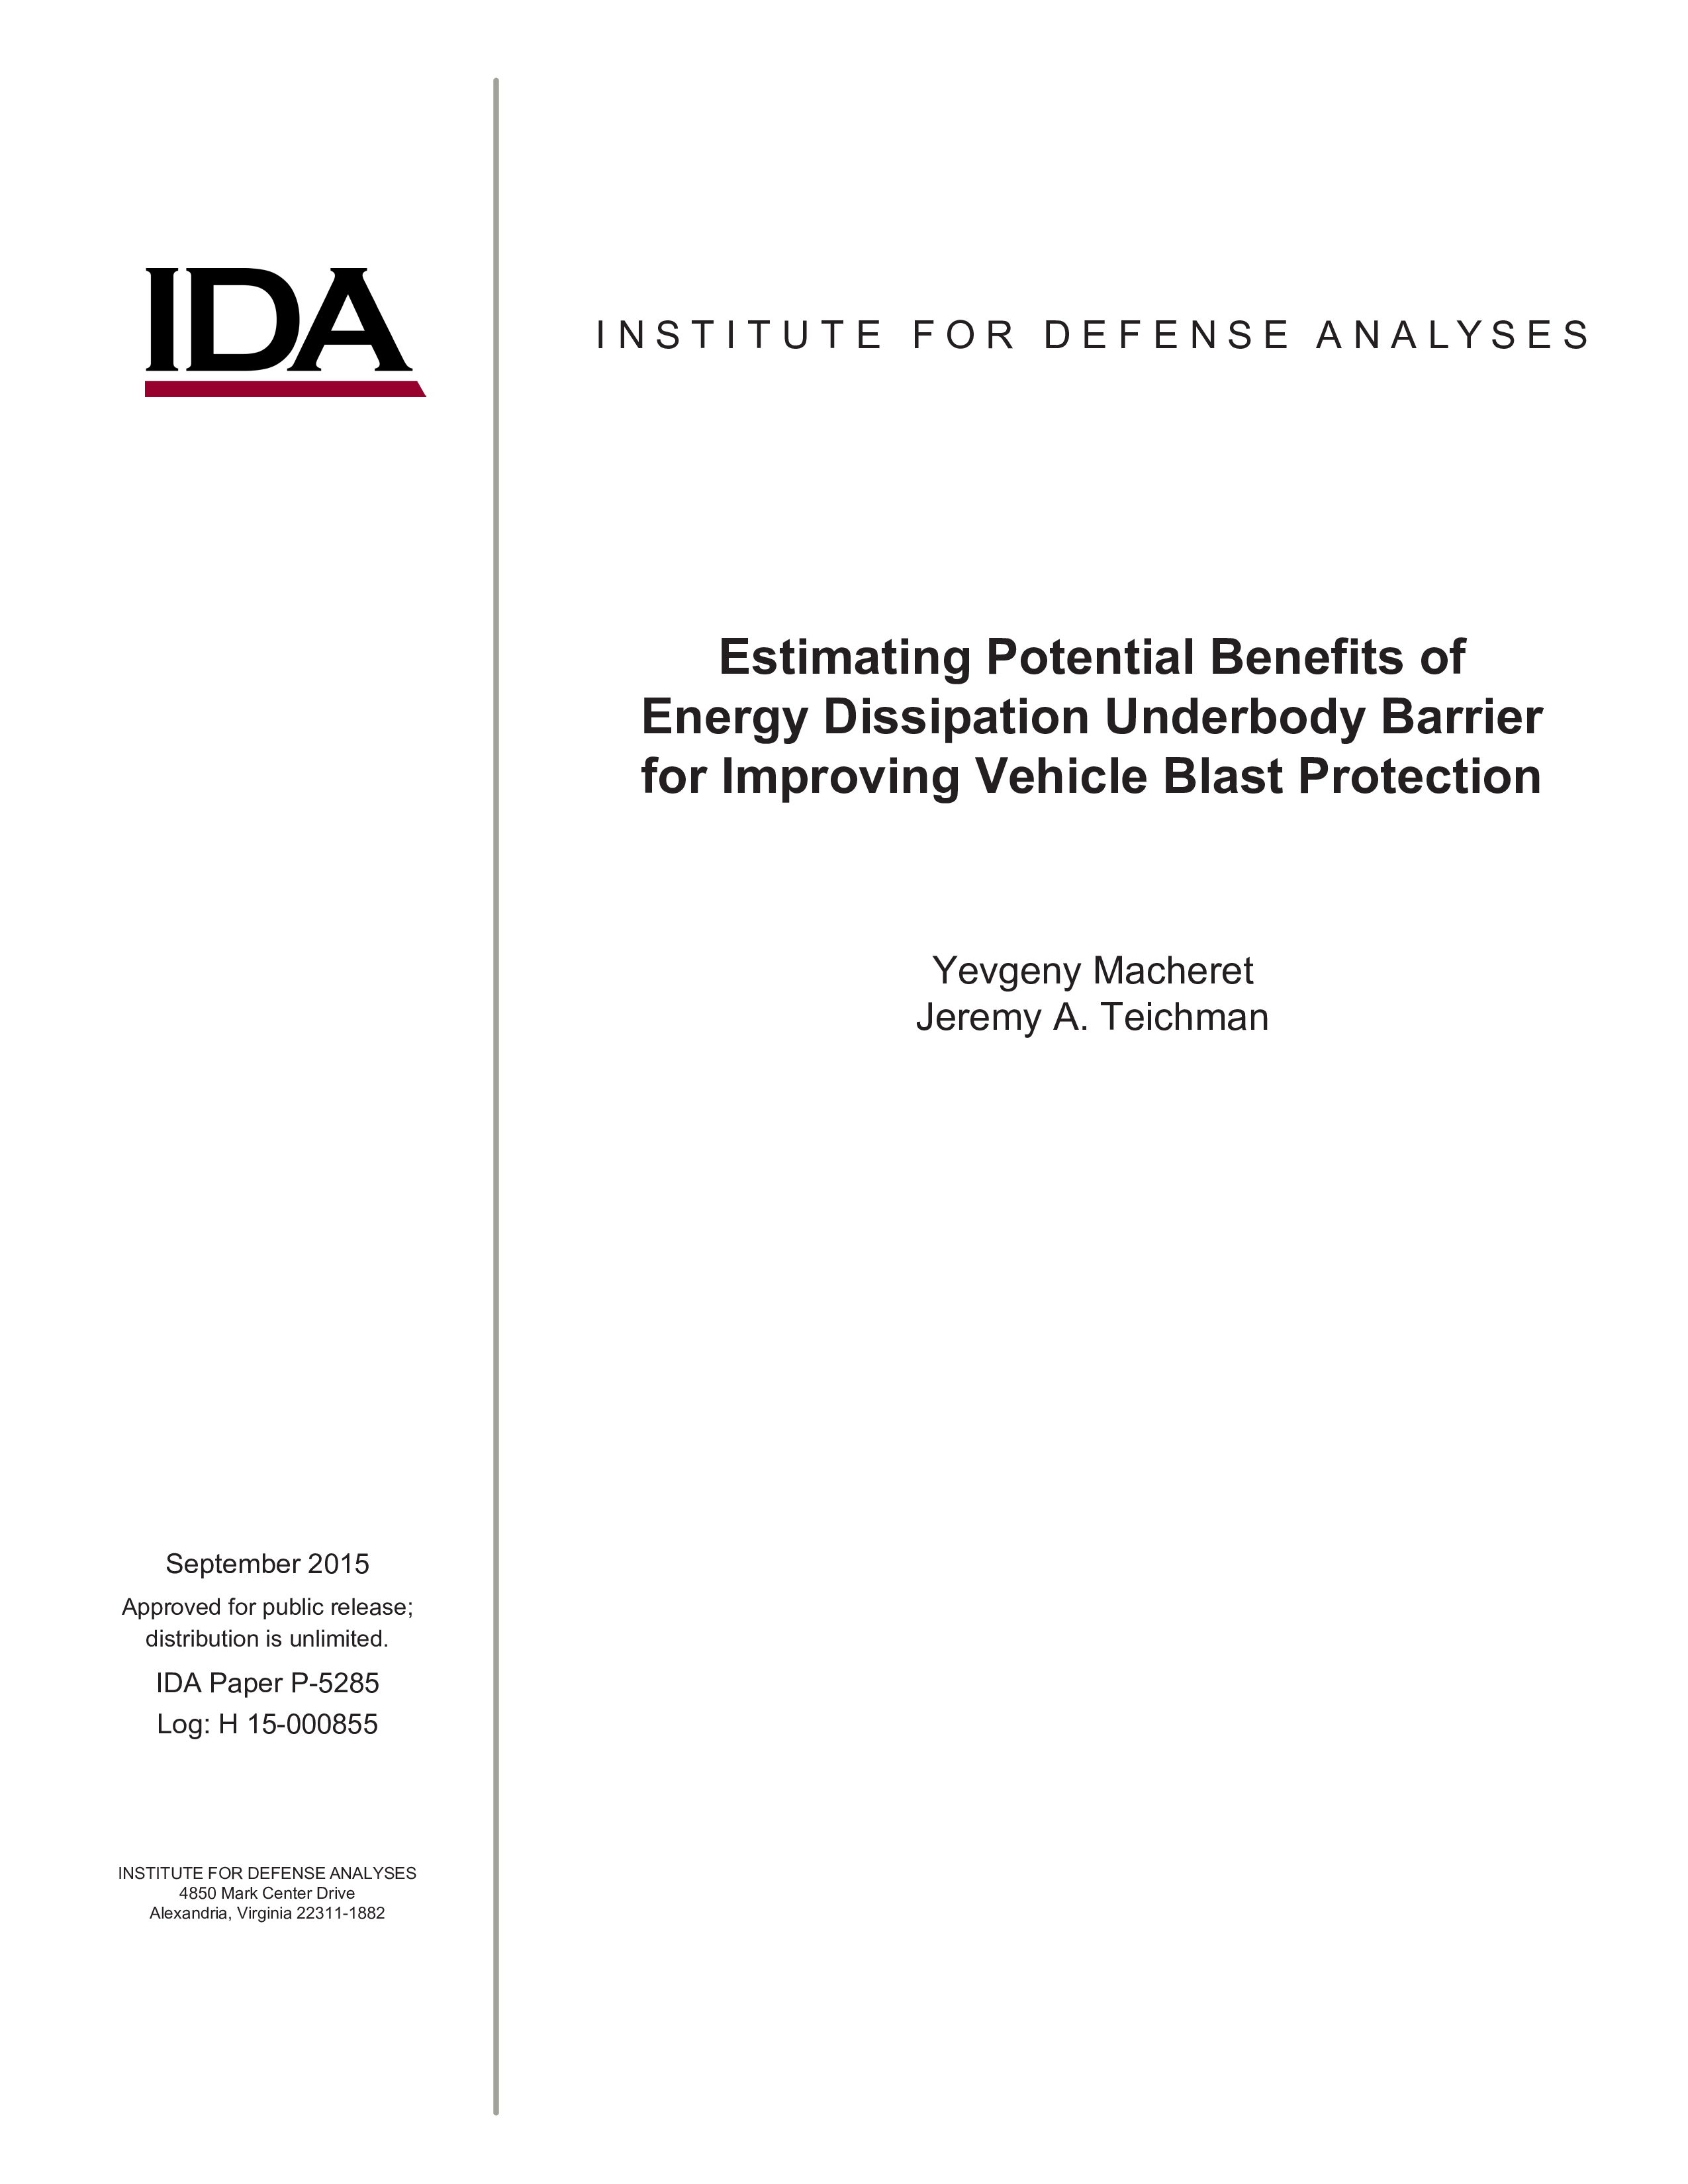 Estimating Potential Benefits of Energy Dissipation Underbody Barrier for Improving Vehicle Blast Protection